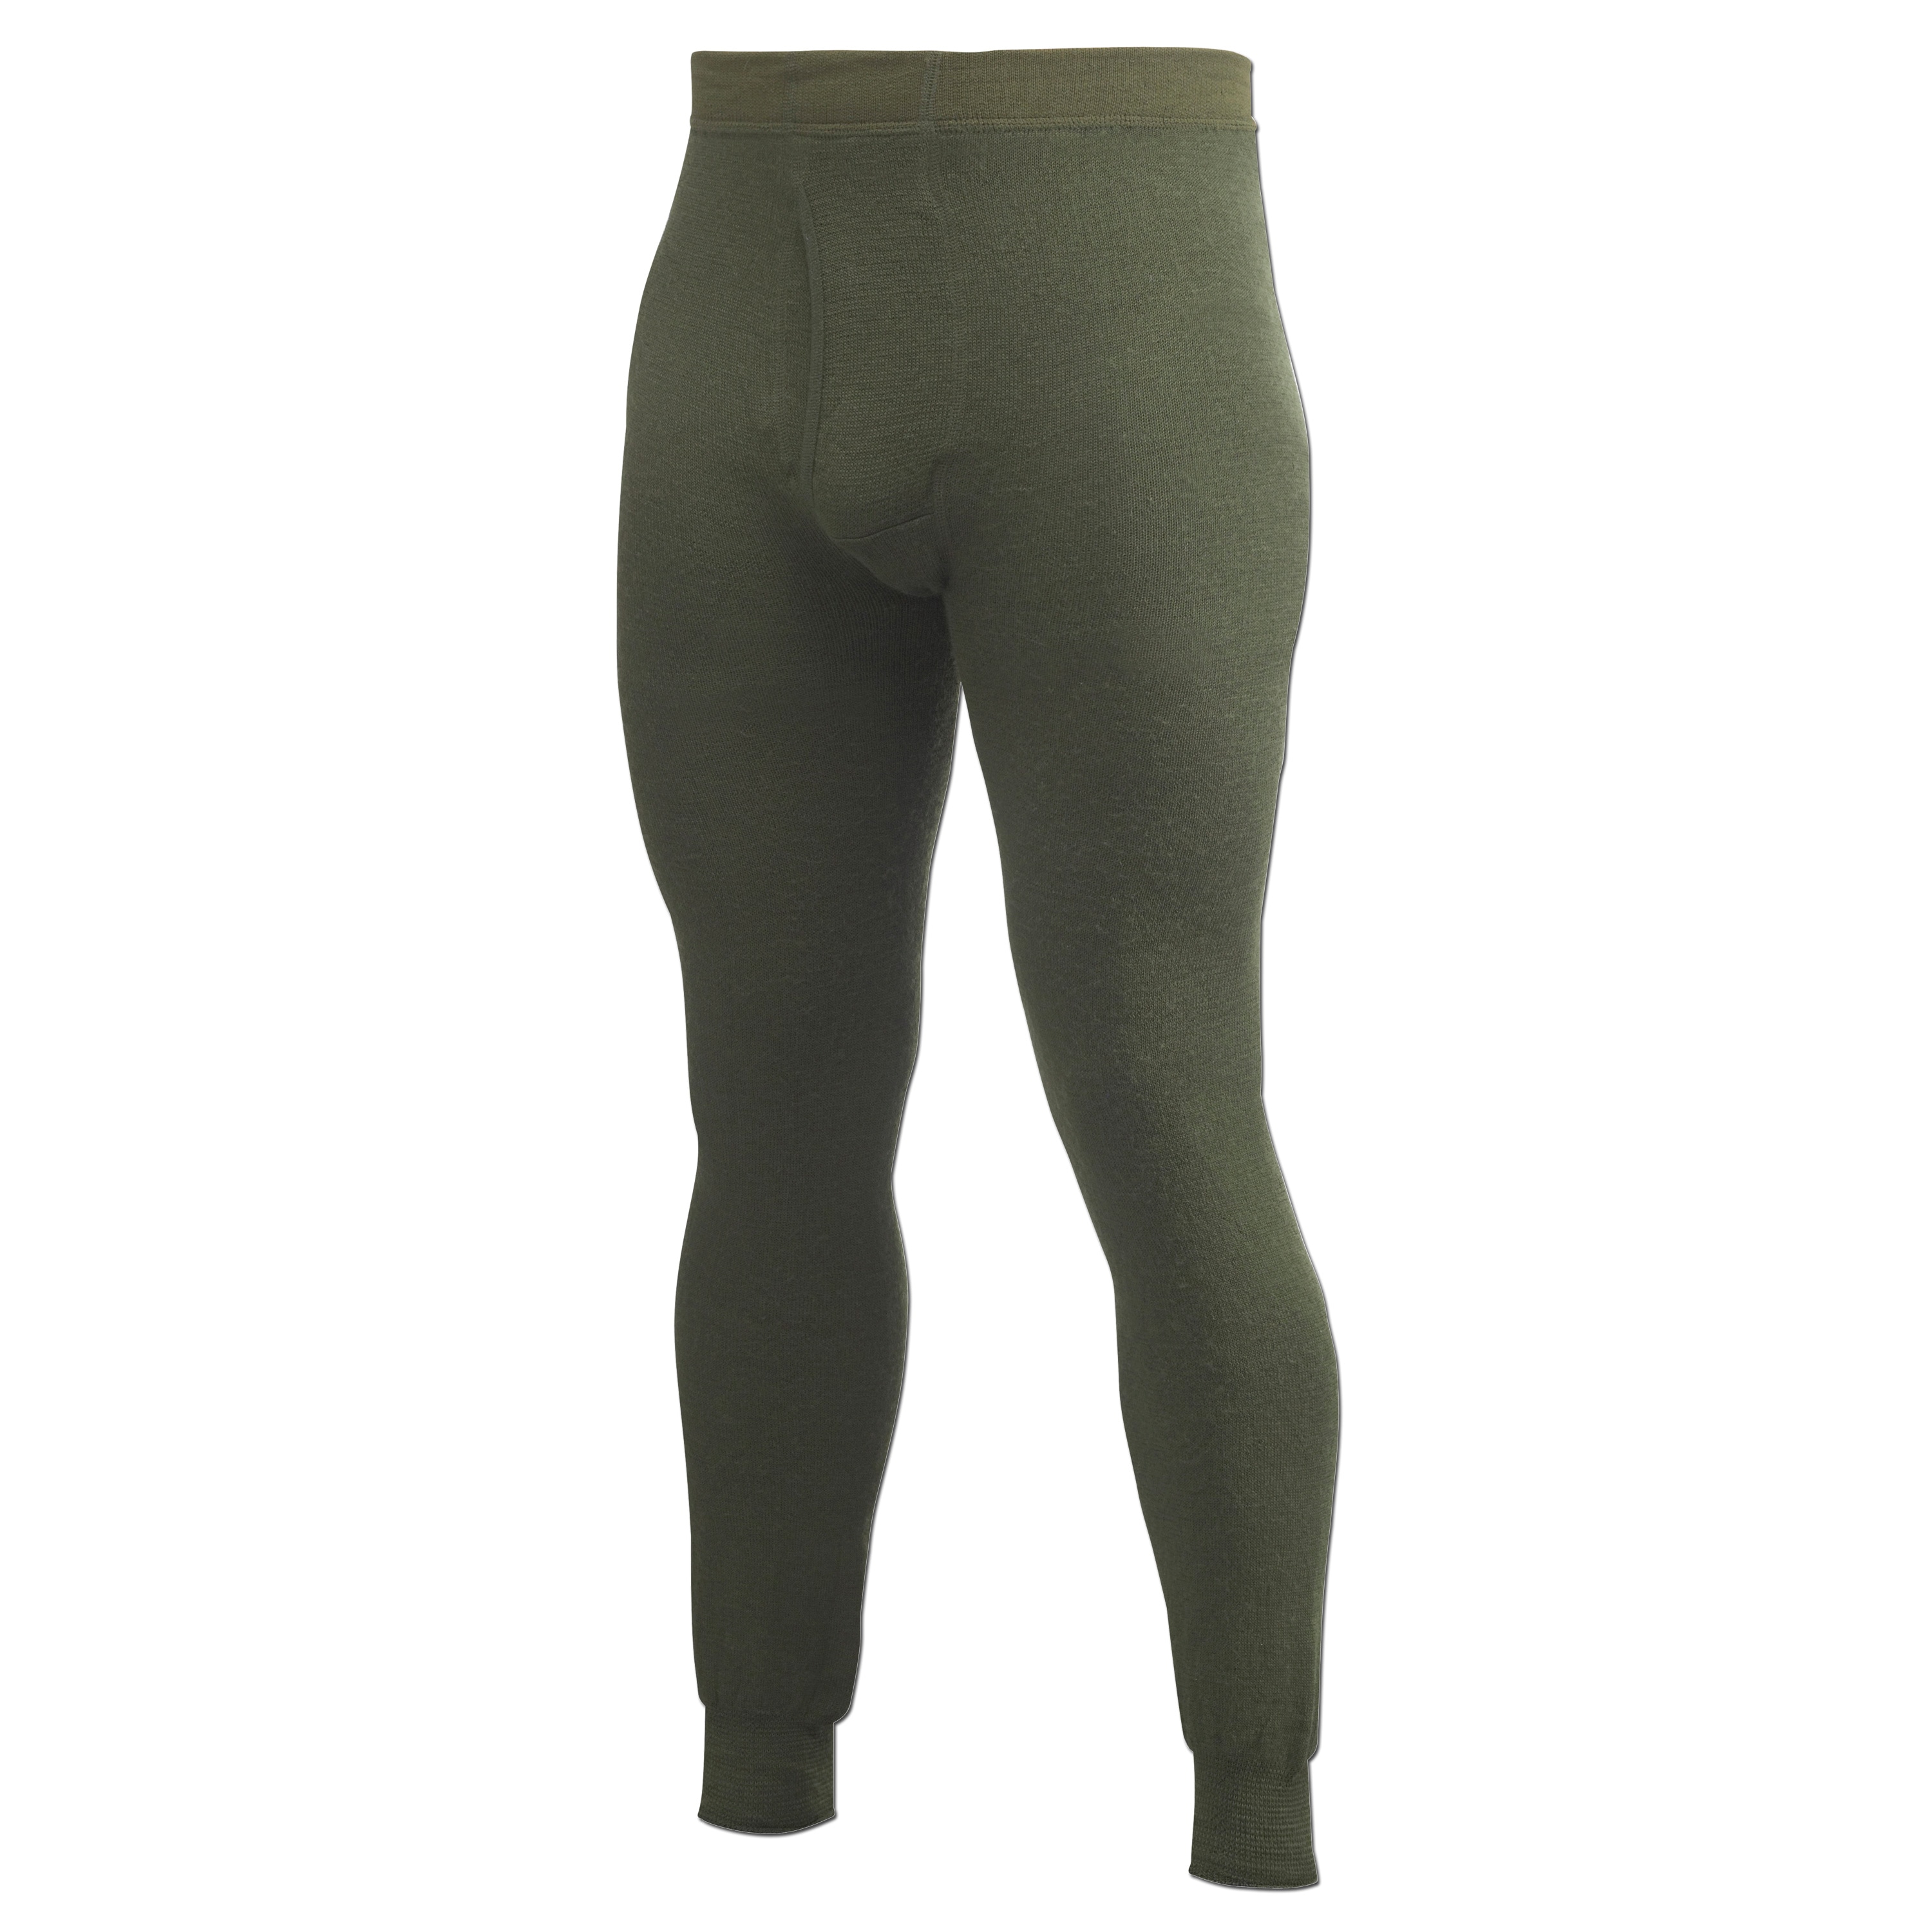 Purchase the Woolpower Long Underwear 400 g. olive by ASMC